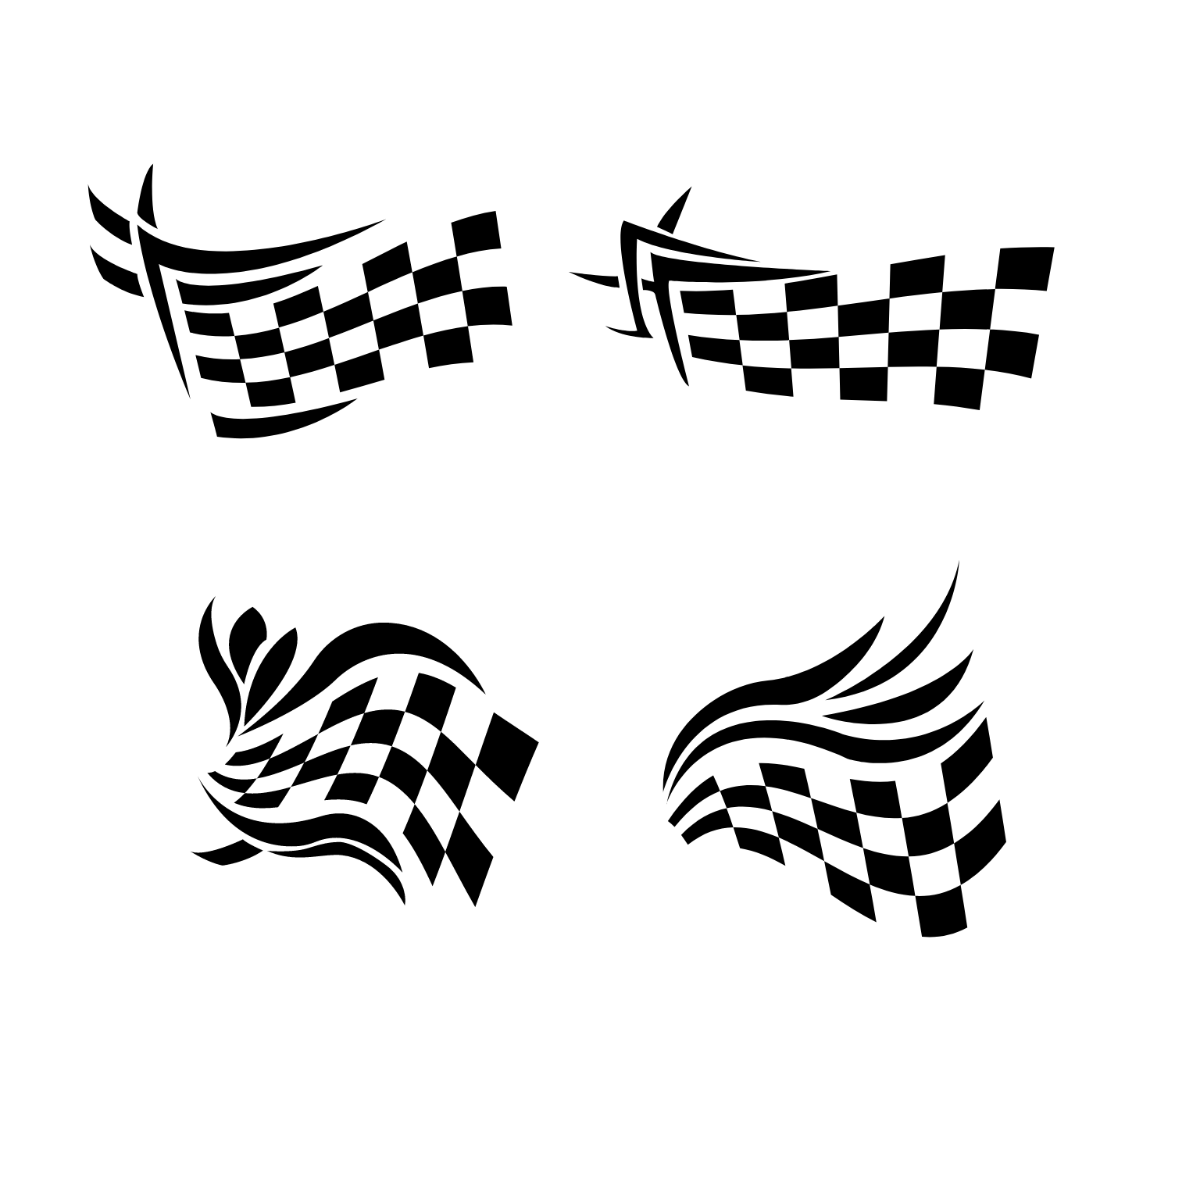 fFree Tribal Checkered Flag Vector Template